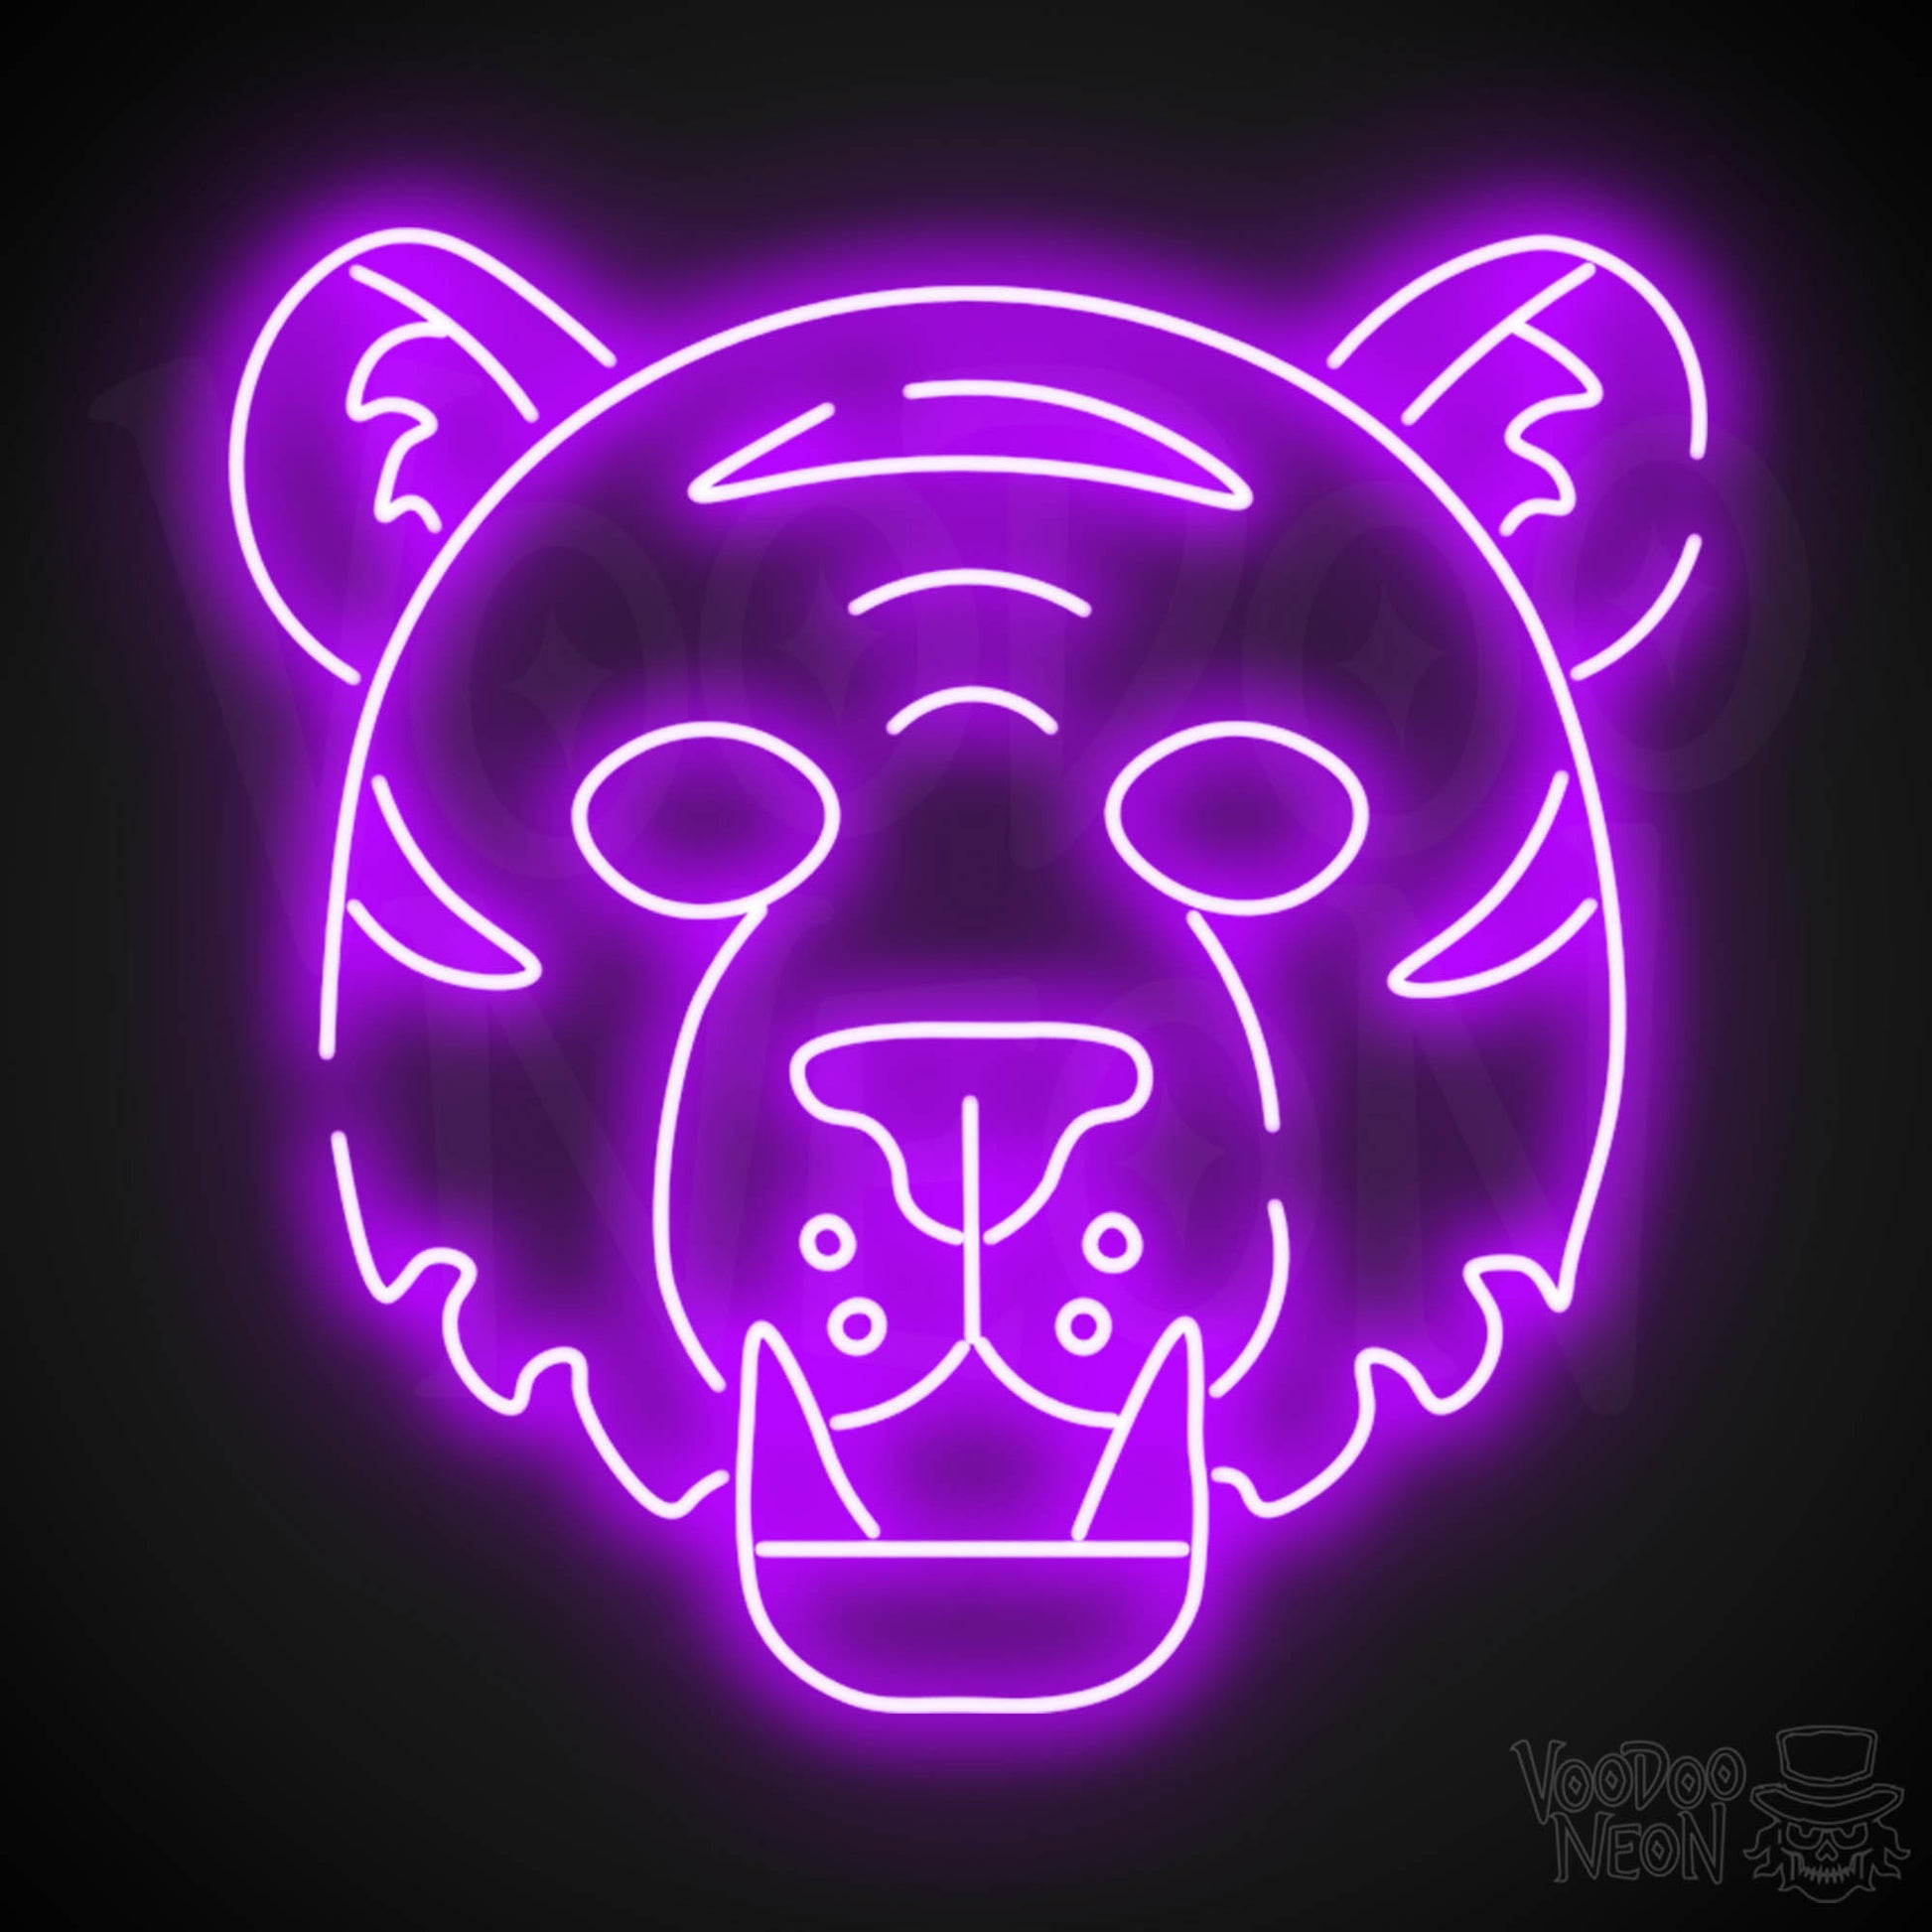 Neon Tiger Wall Art - Neon Tiger Sign - Tiger Neon Sign - LED Sign - Color Purple